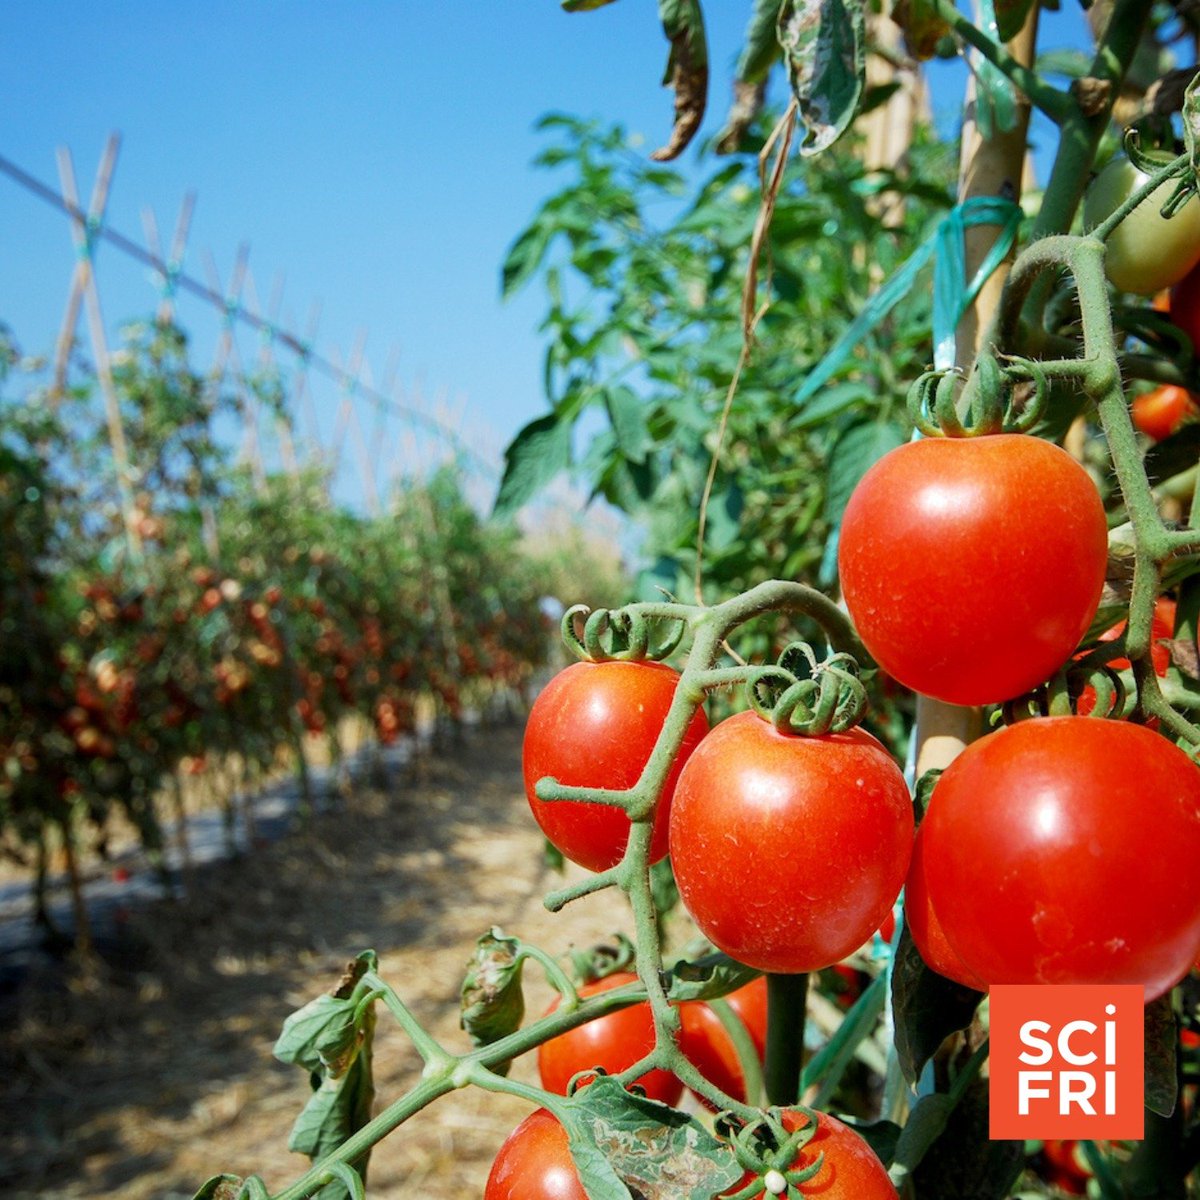 Some foods have a larger carbon footprint when grown in urban settings than on commercial farms, while the reverse is true for others. In today’s episode, we discuss the complex science of homegrown tomatoes. Listen here 🎧: pod.link/73329284